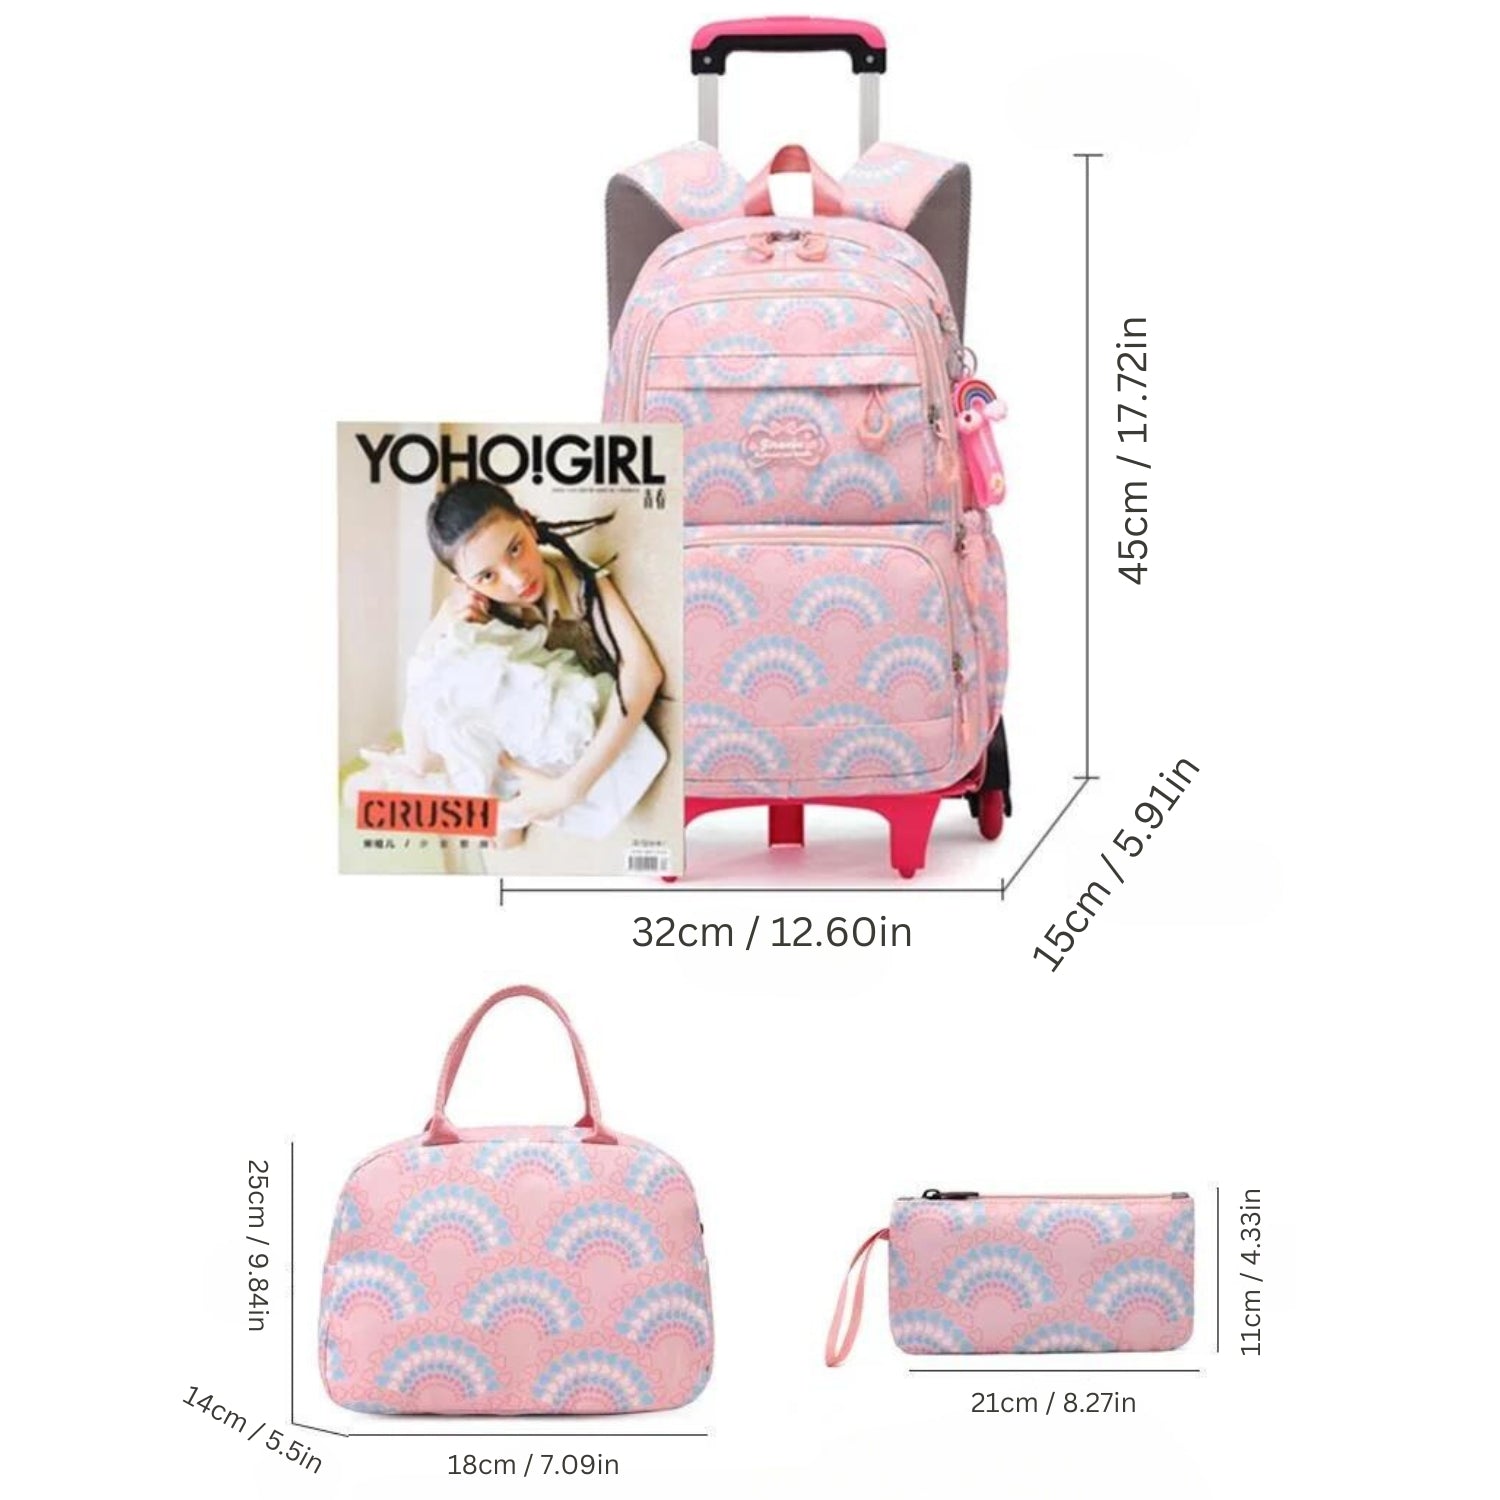 Enchanted Rainbow Trolley Backpack for Girls